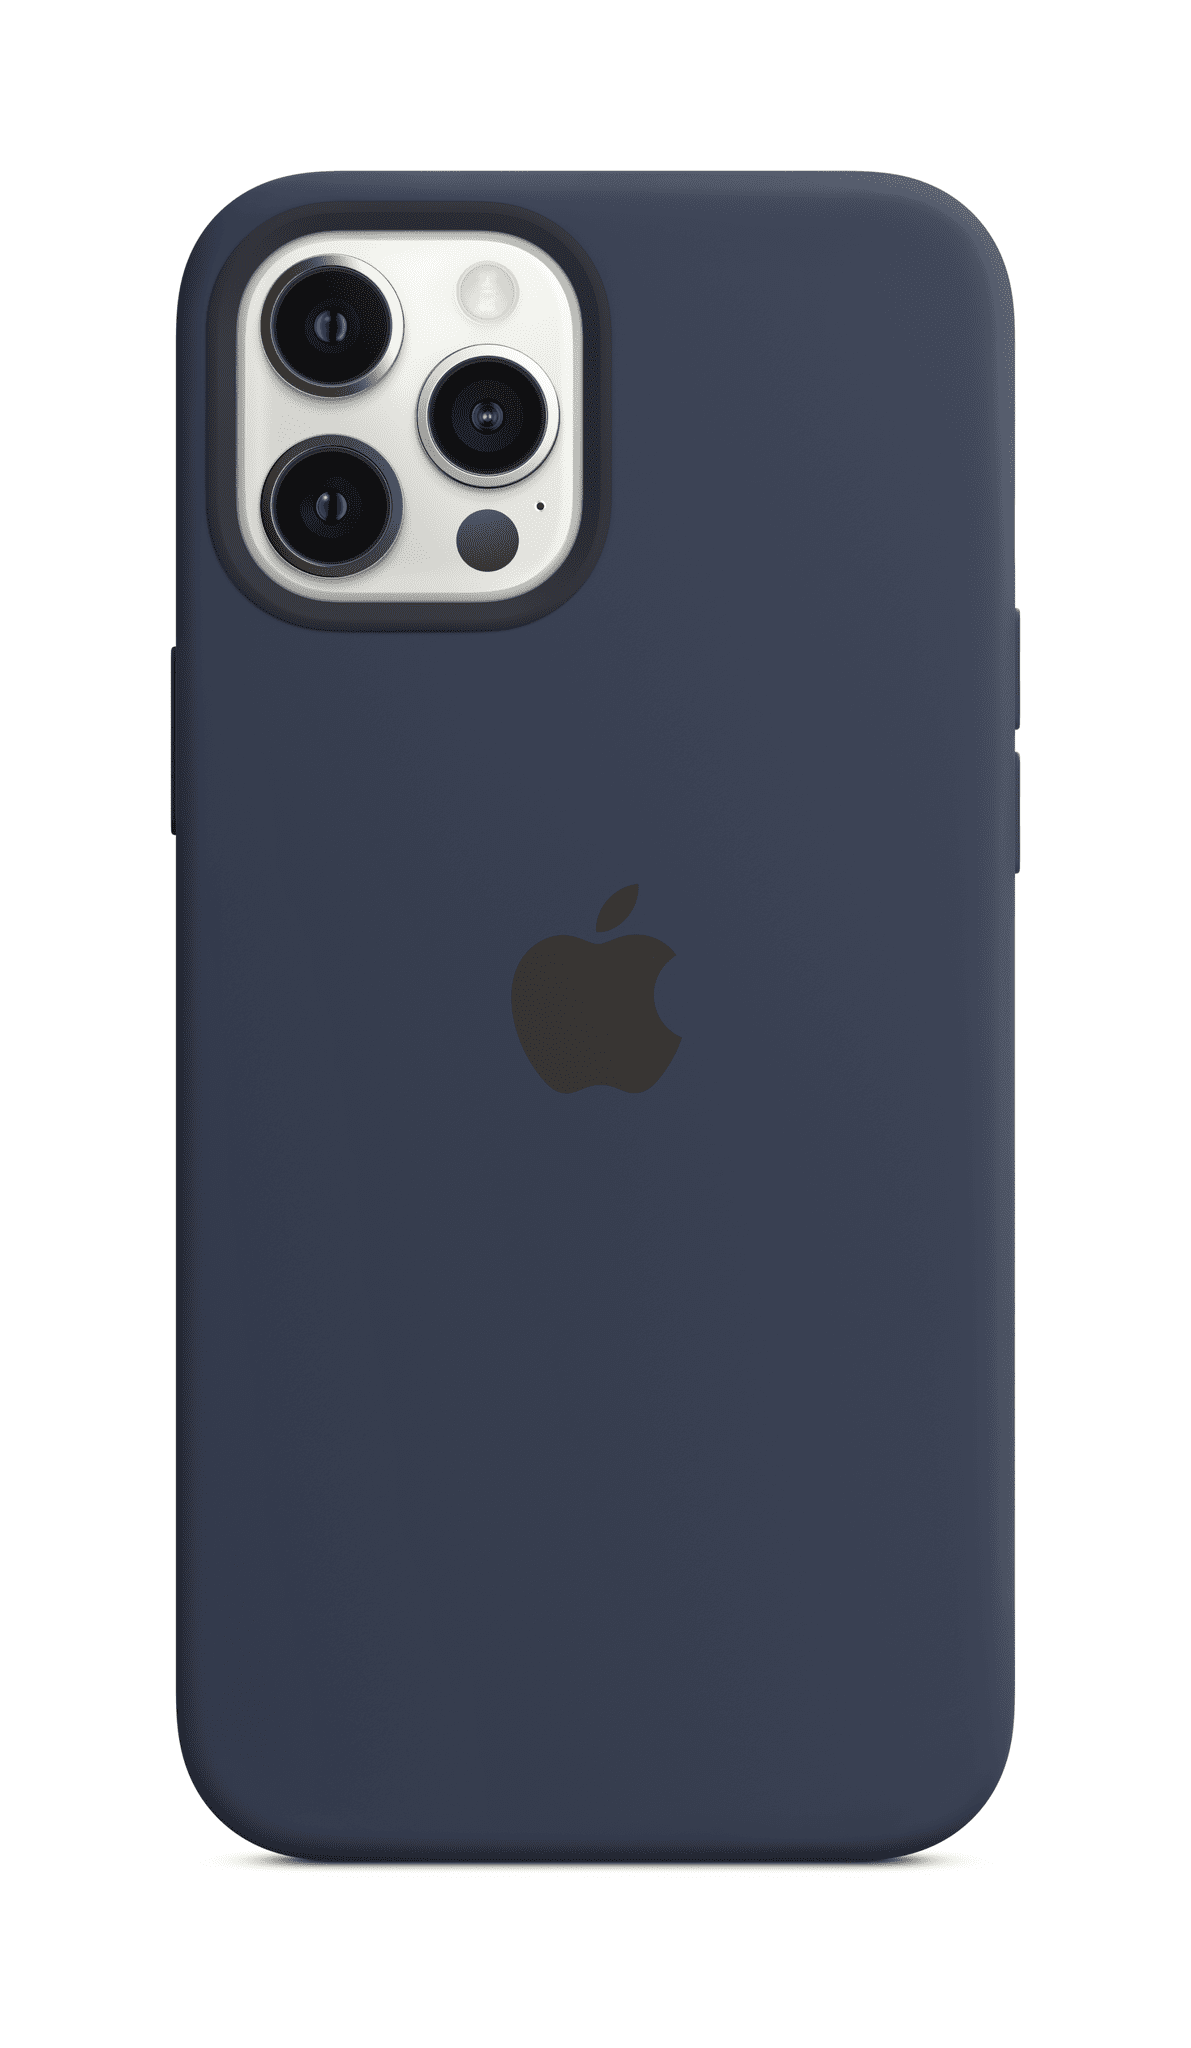 iPhone 12 Pro Max Silicone Case with MagSafe - Deep Navy - Walmart.com